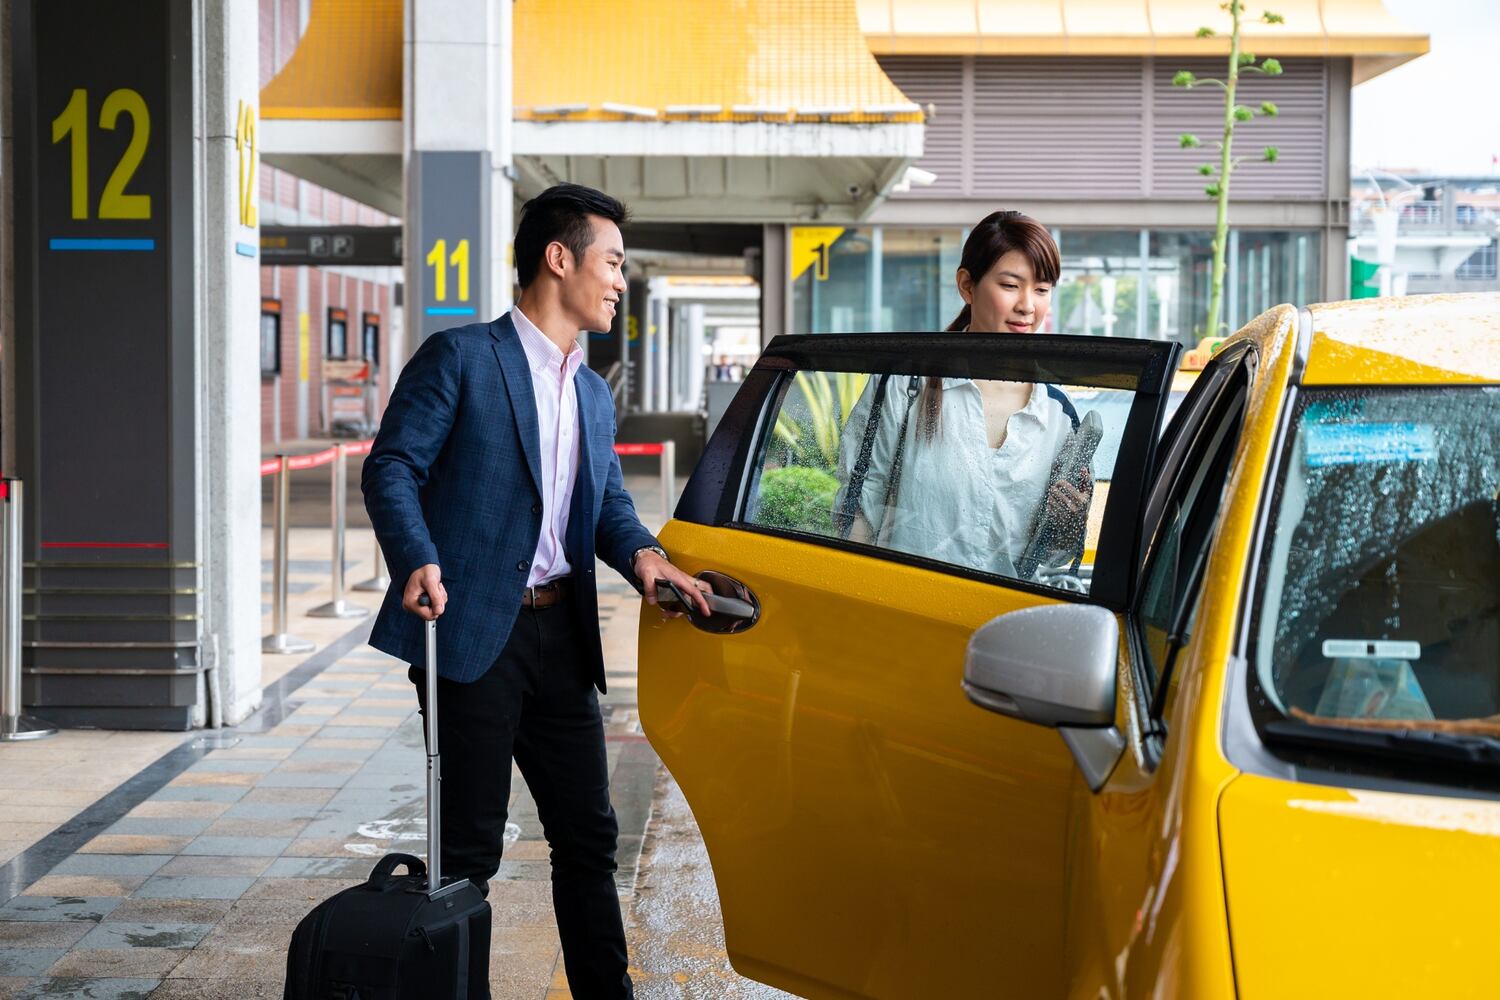 Tipping-taxis-in-Vietnam - Danang Car Rental With Driver